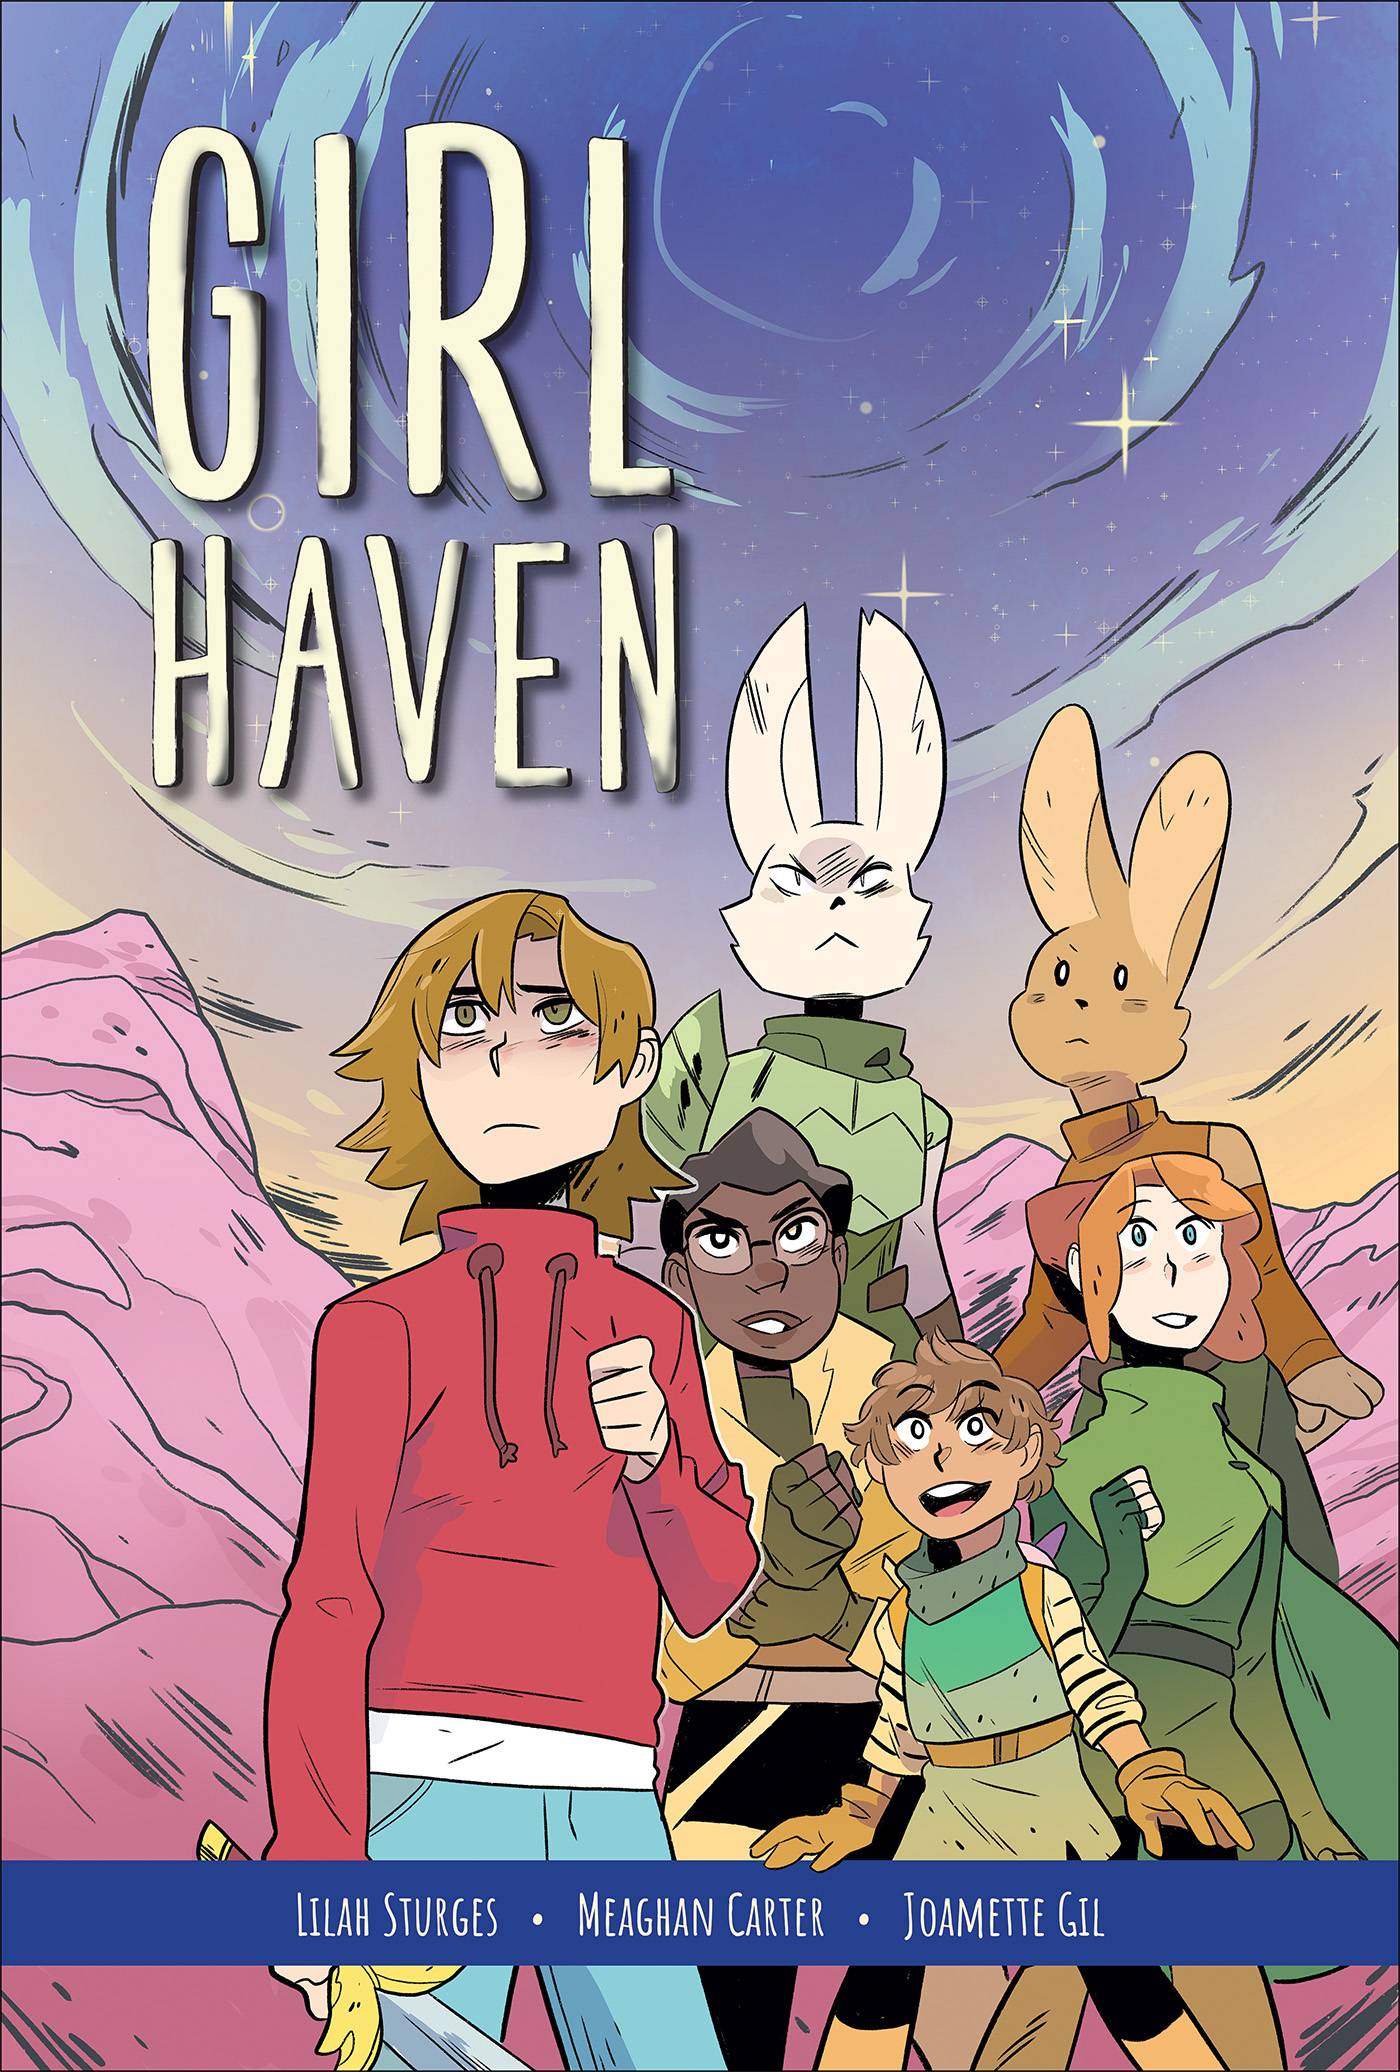 A light-skinned teen with shoulderlength light brown hair and green eyes stands in a rocky alien landscape. They are wearing a red pullover and blue trousers, holding a sword loosely, and clutching their chest anxiously. Behind them are two humanoid rabbit creatures, one white and one brown, in sci-fi armour, as well as three girls in more fantasy clothing. They look excited and determined.